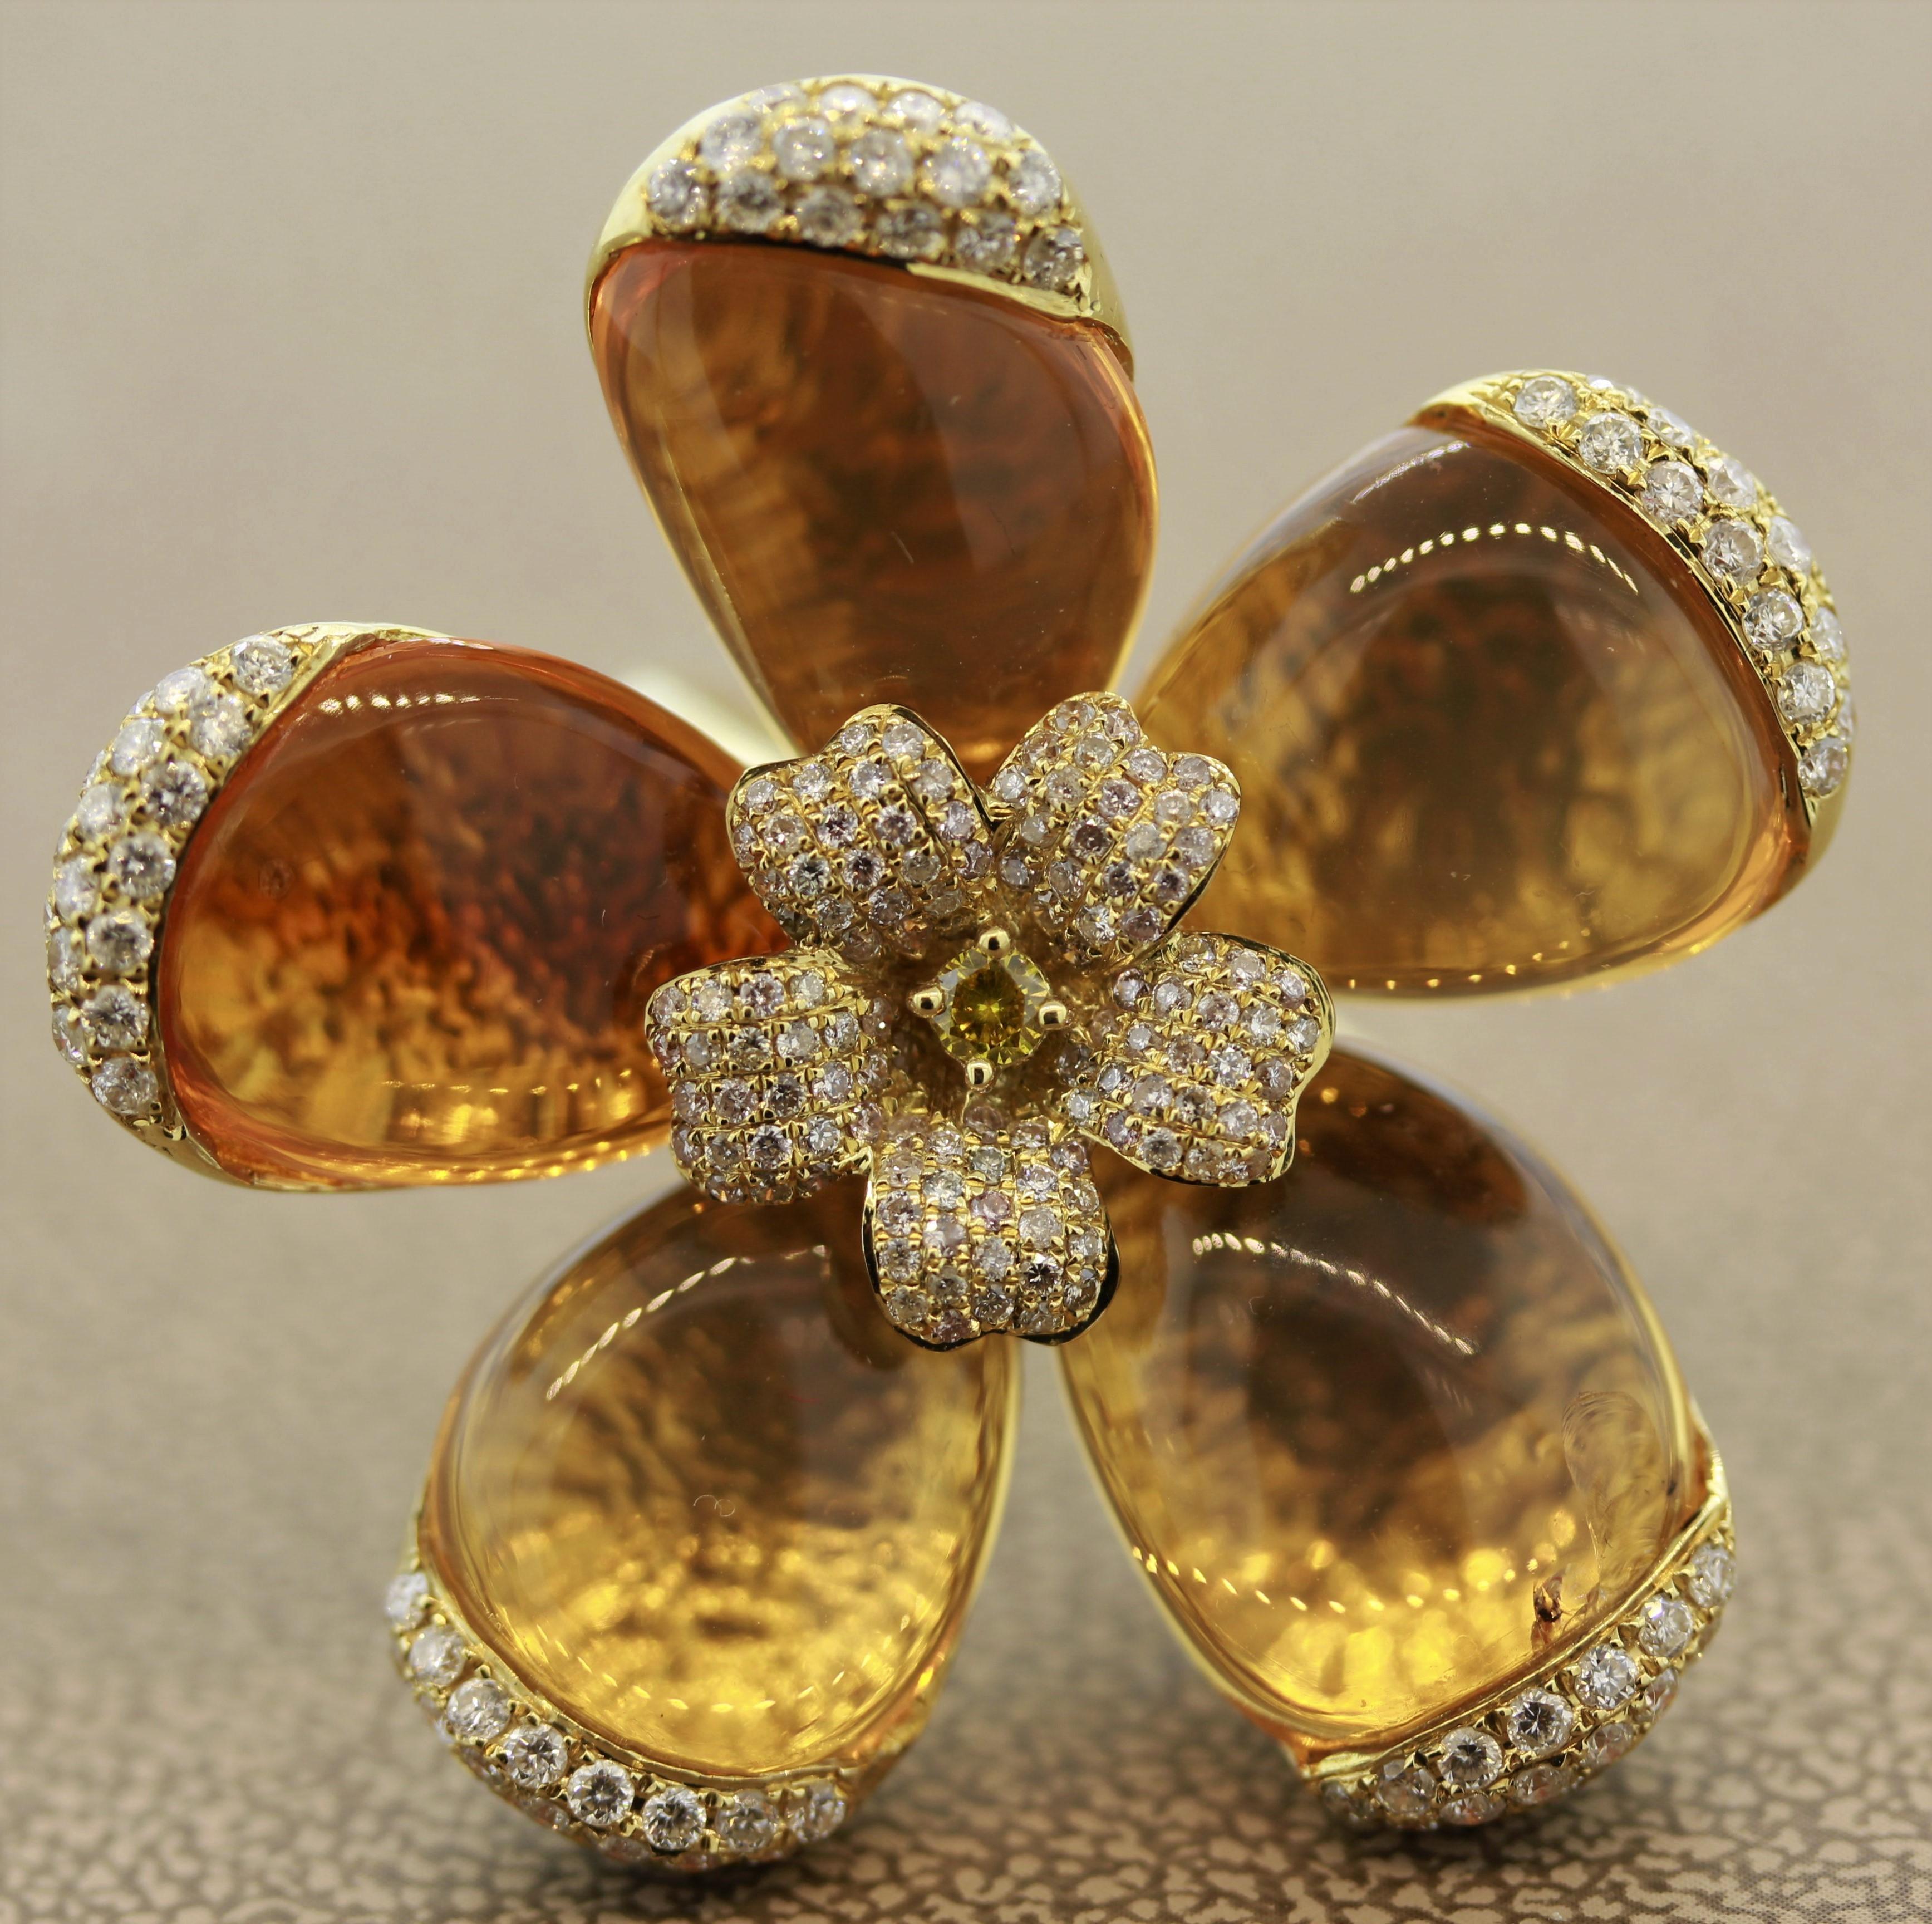 A unique flower ring featuring 5 pieces of fire opal which are used as the flower’s petals. Accenting the pieces are 1.33 carats of round brilliant cut diamonds which are set all around the ring, along with one larger fancy yellow diamond in the